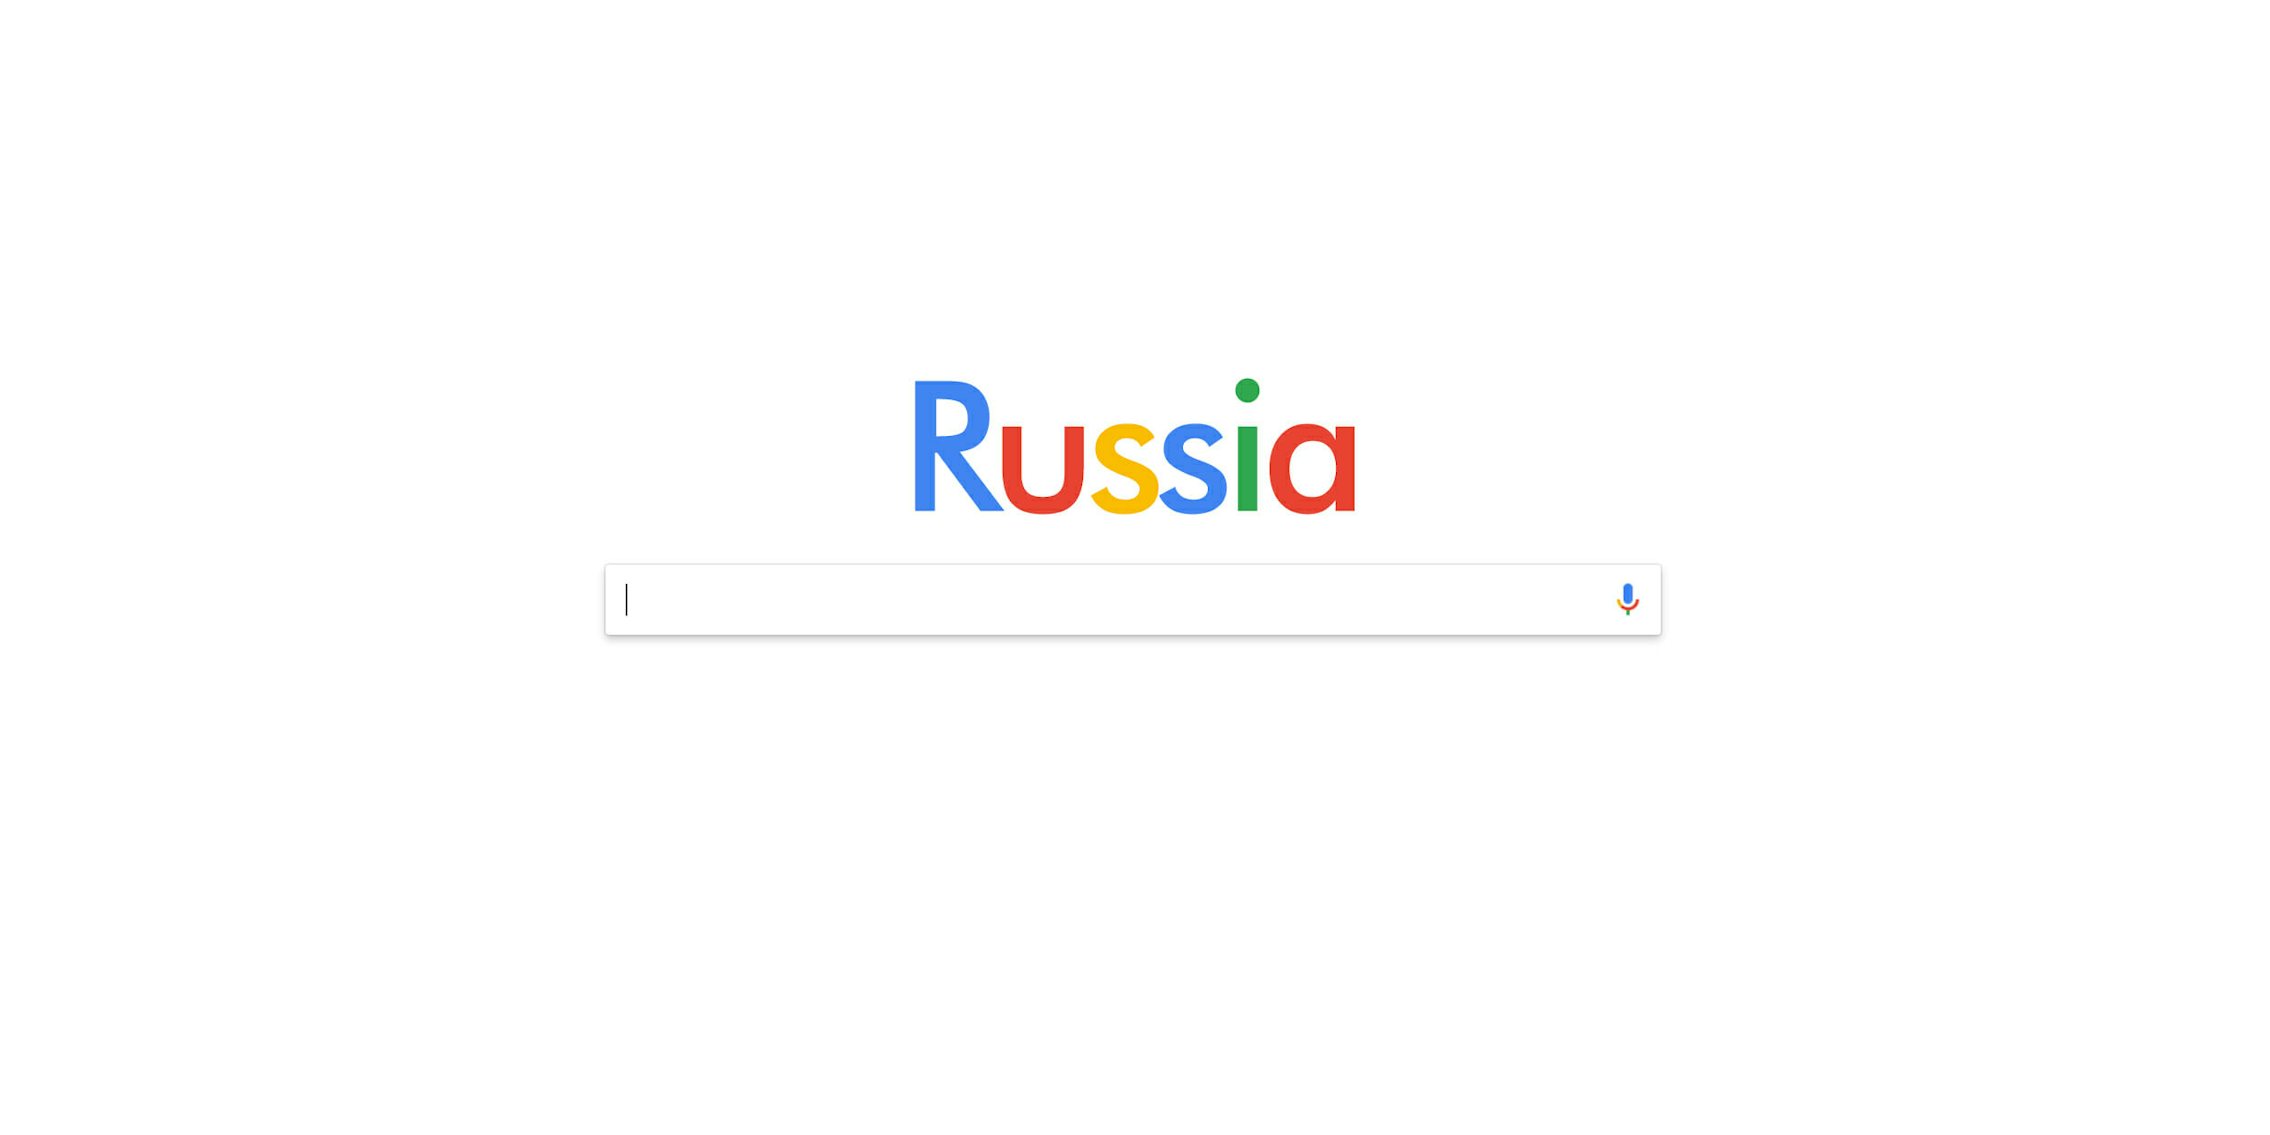 Google search page with logo replaced with 'Russia'